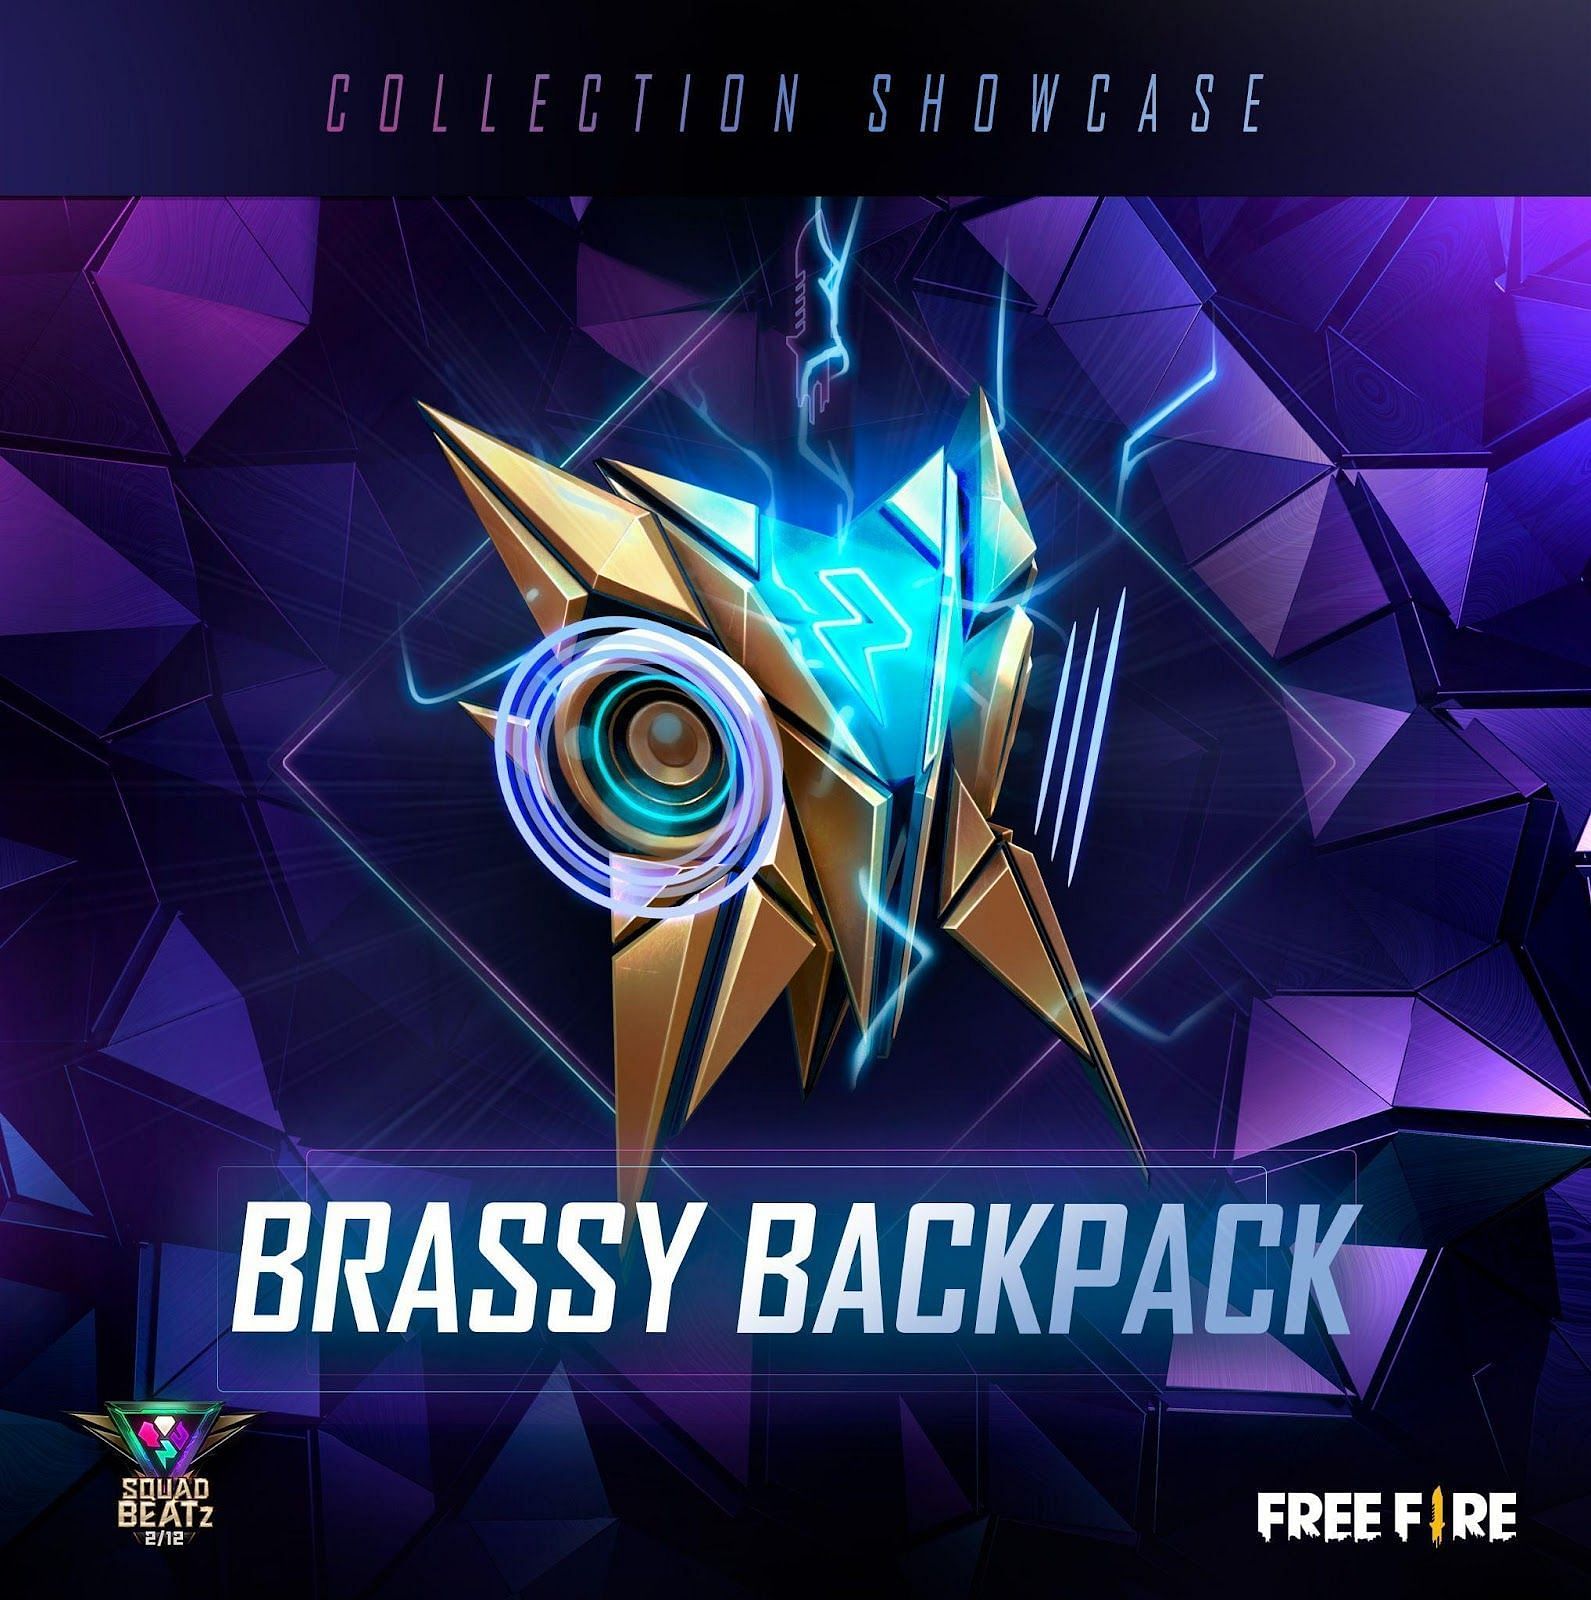 Brassy Backpack: New squad Beatz-themed collectible